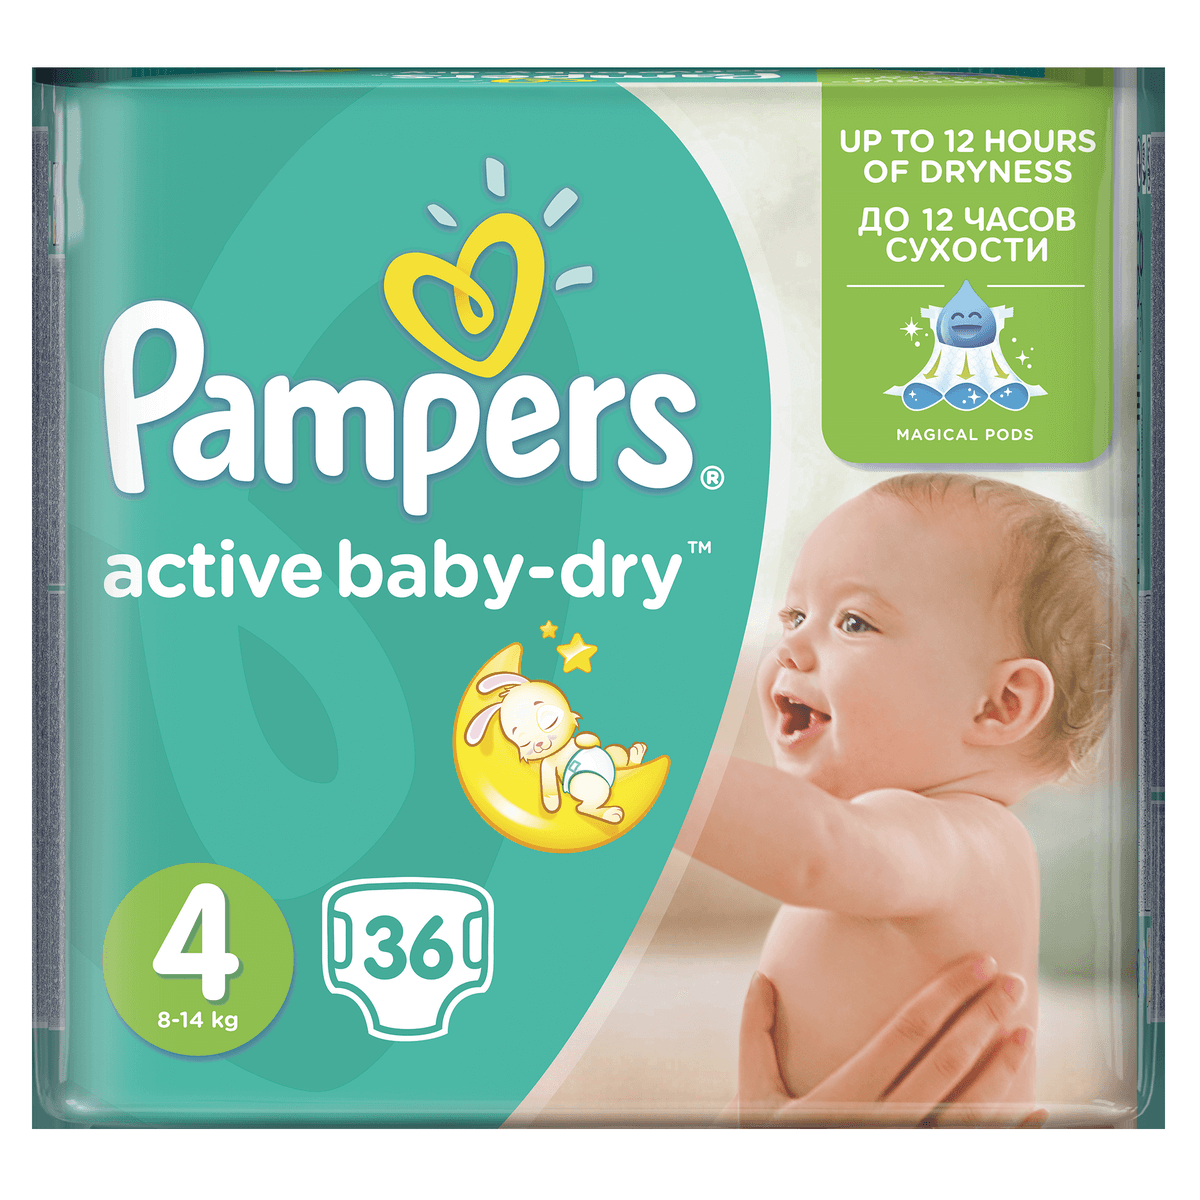 pampers active baby 4 maxi